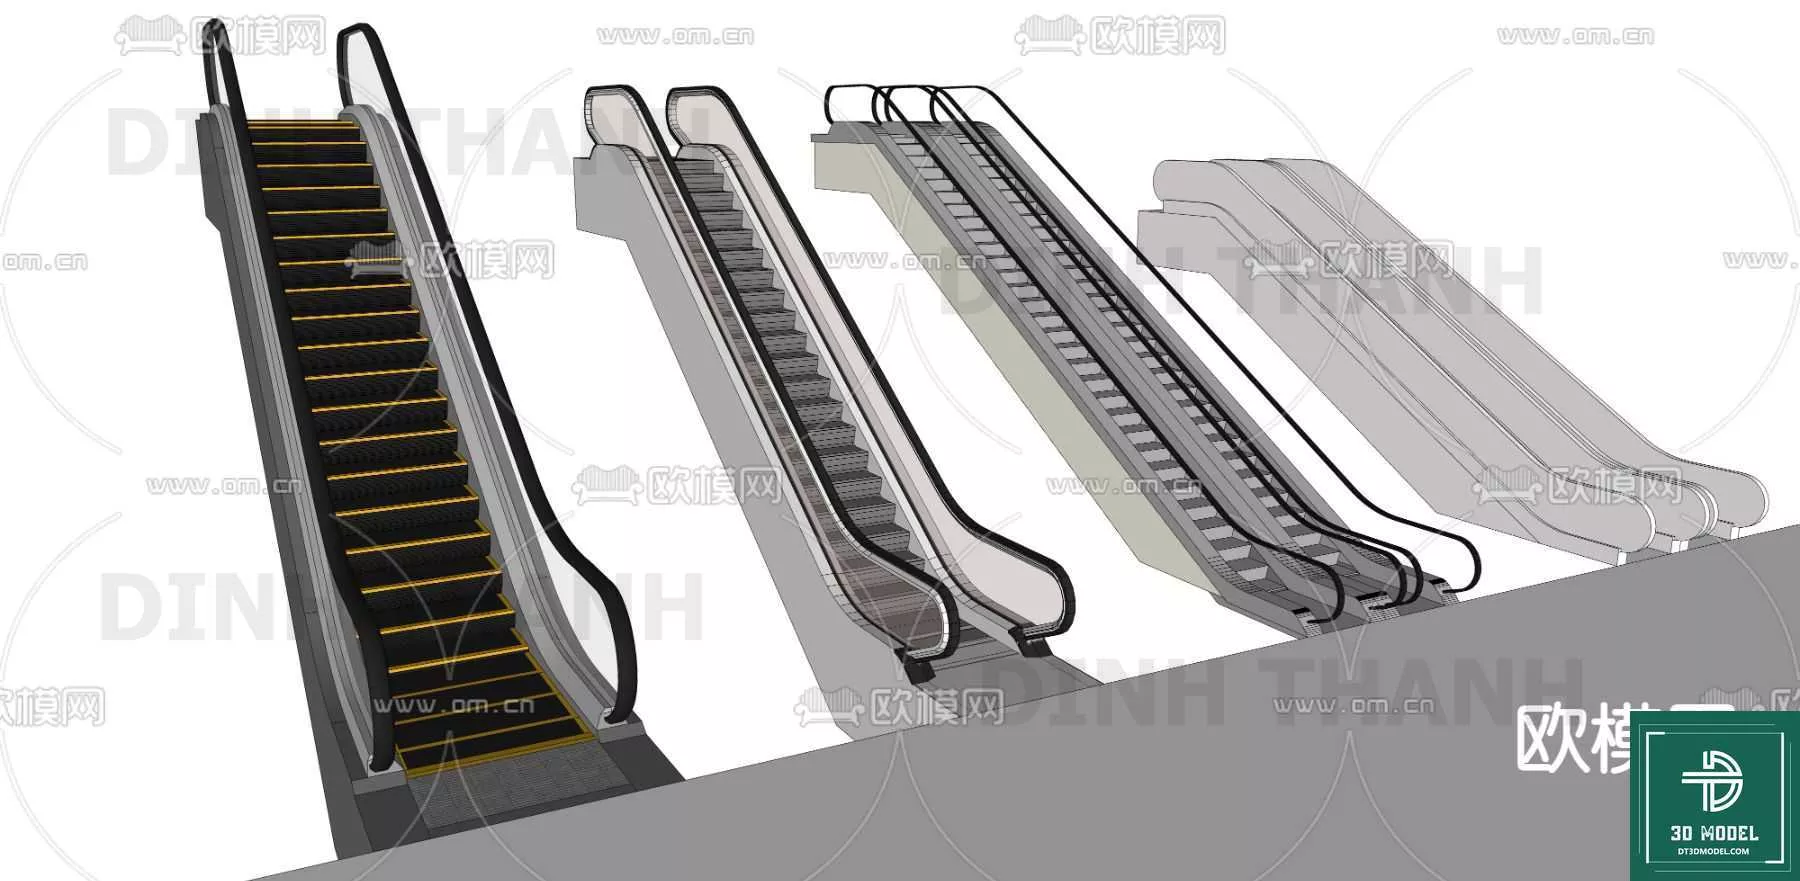 MODERN STAIR - SKETCHUP 3D MODEL - VRAY OR ENSCAPE - ID14297